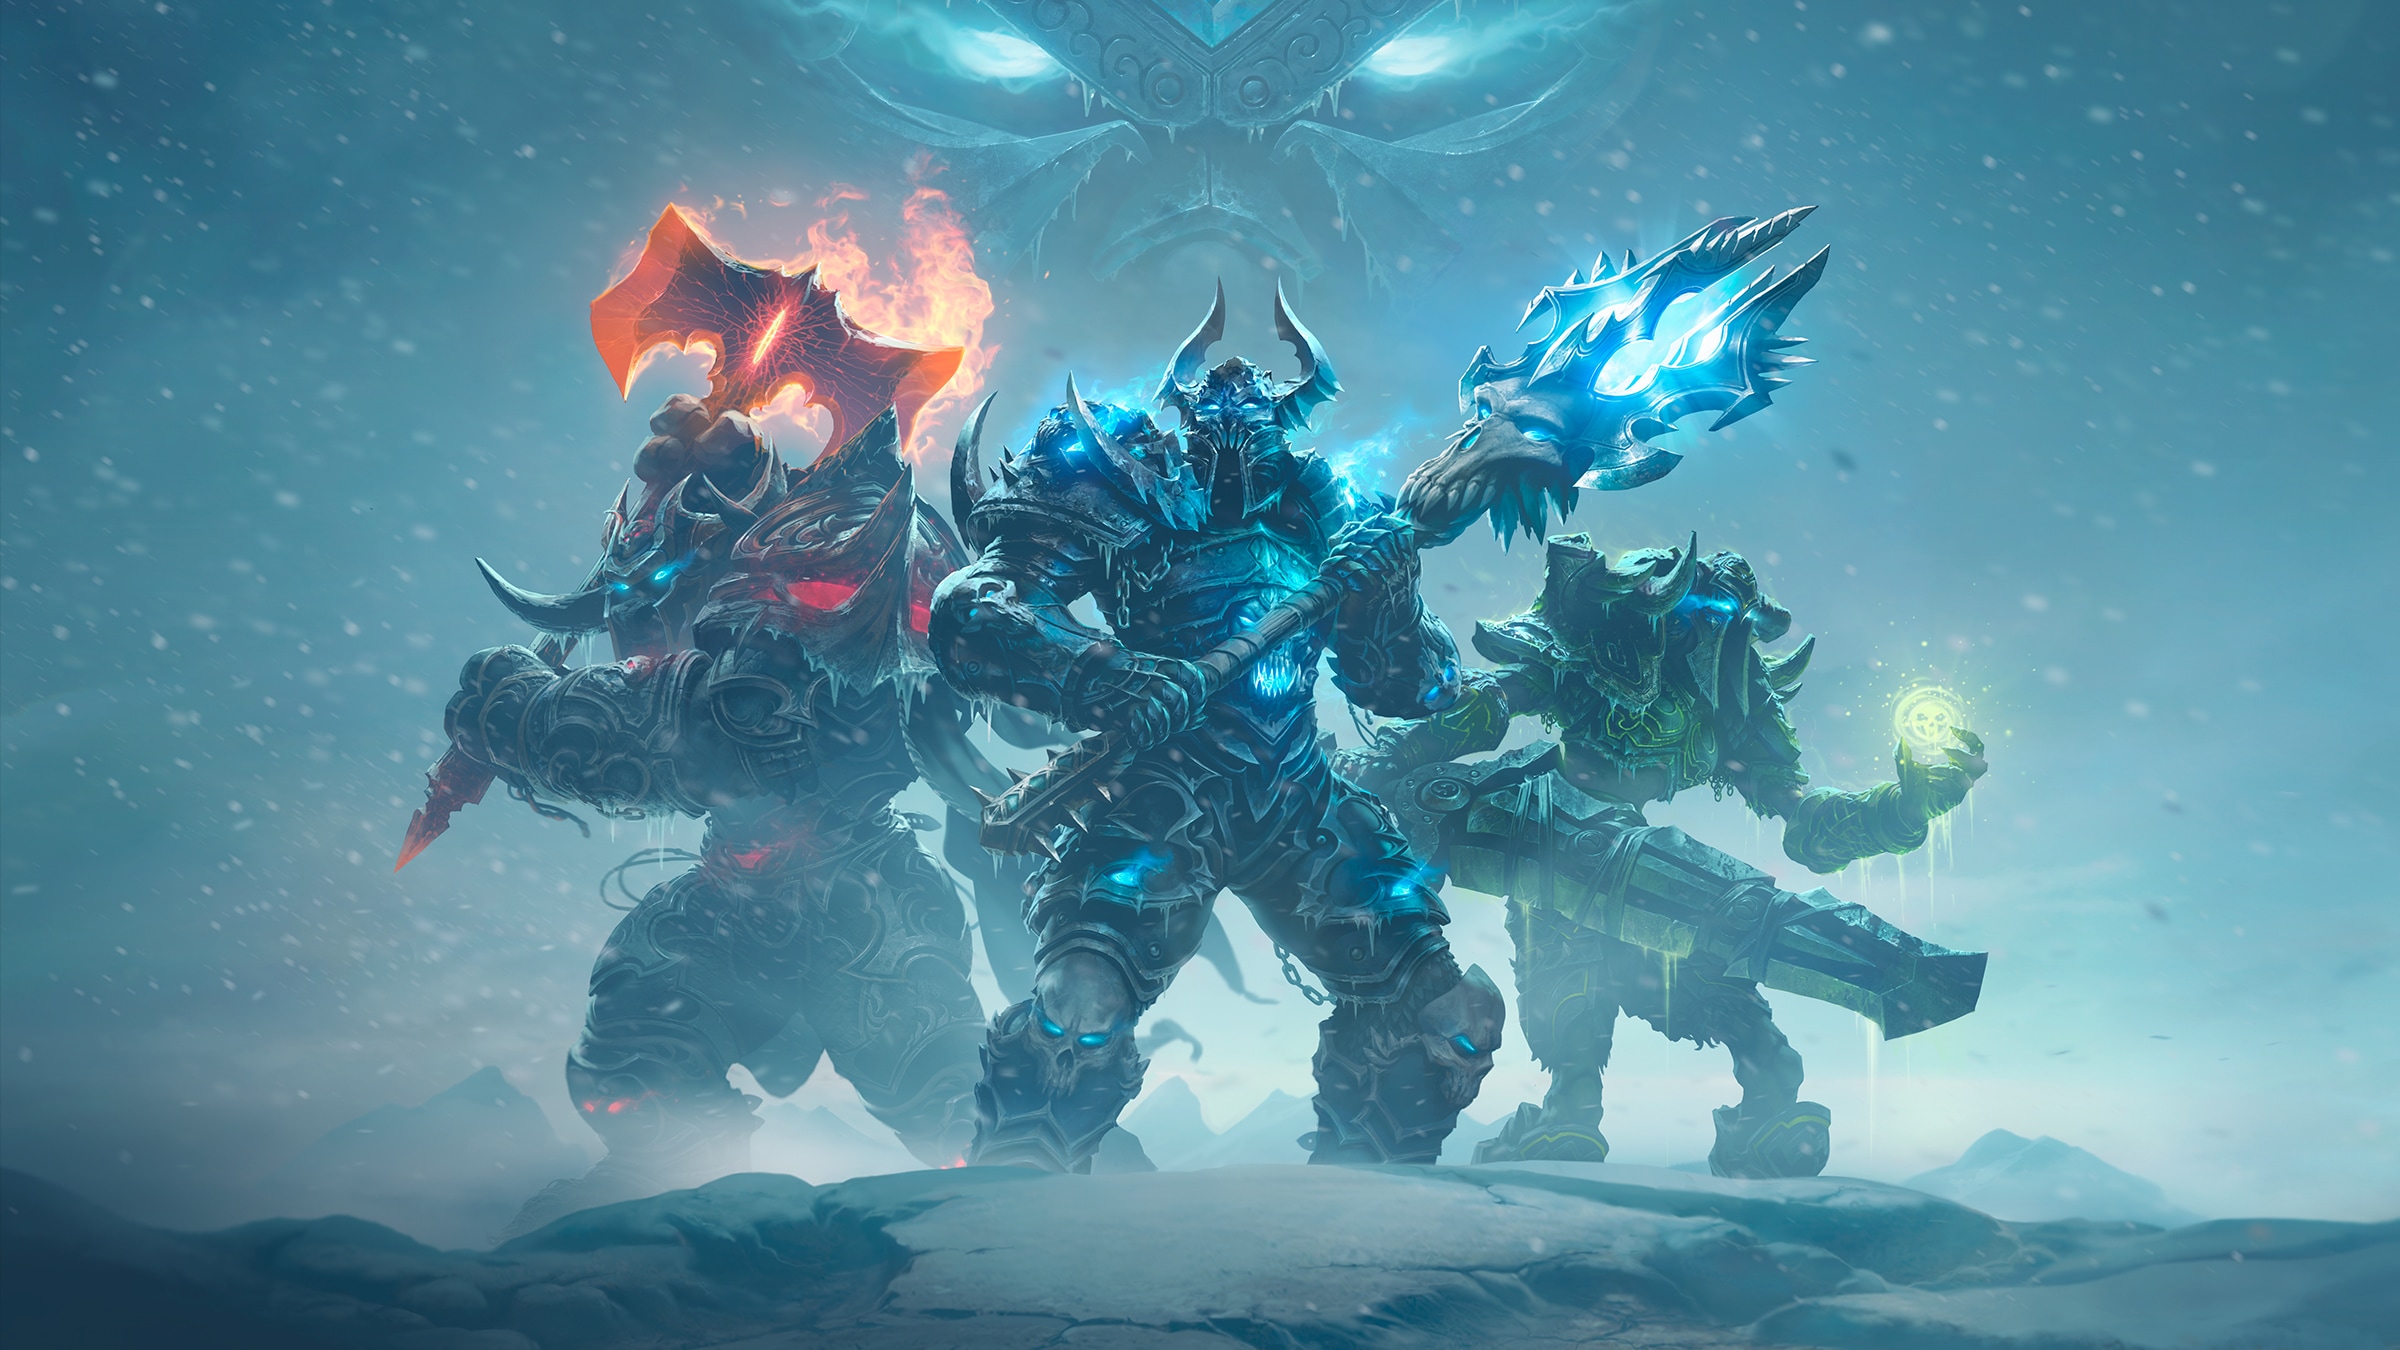 Shatter the Ice: The Wrath of the Lich King Classic™ Goes Live September 26